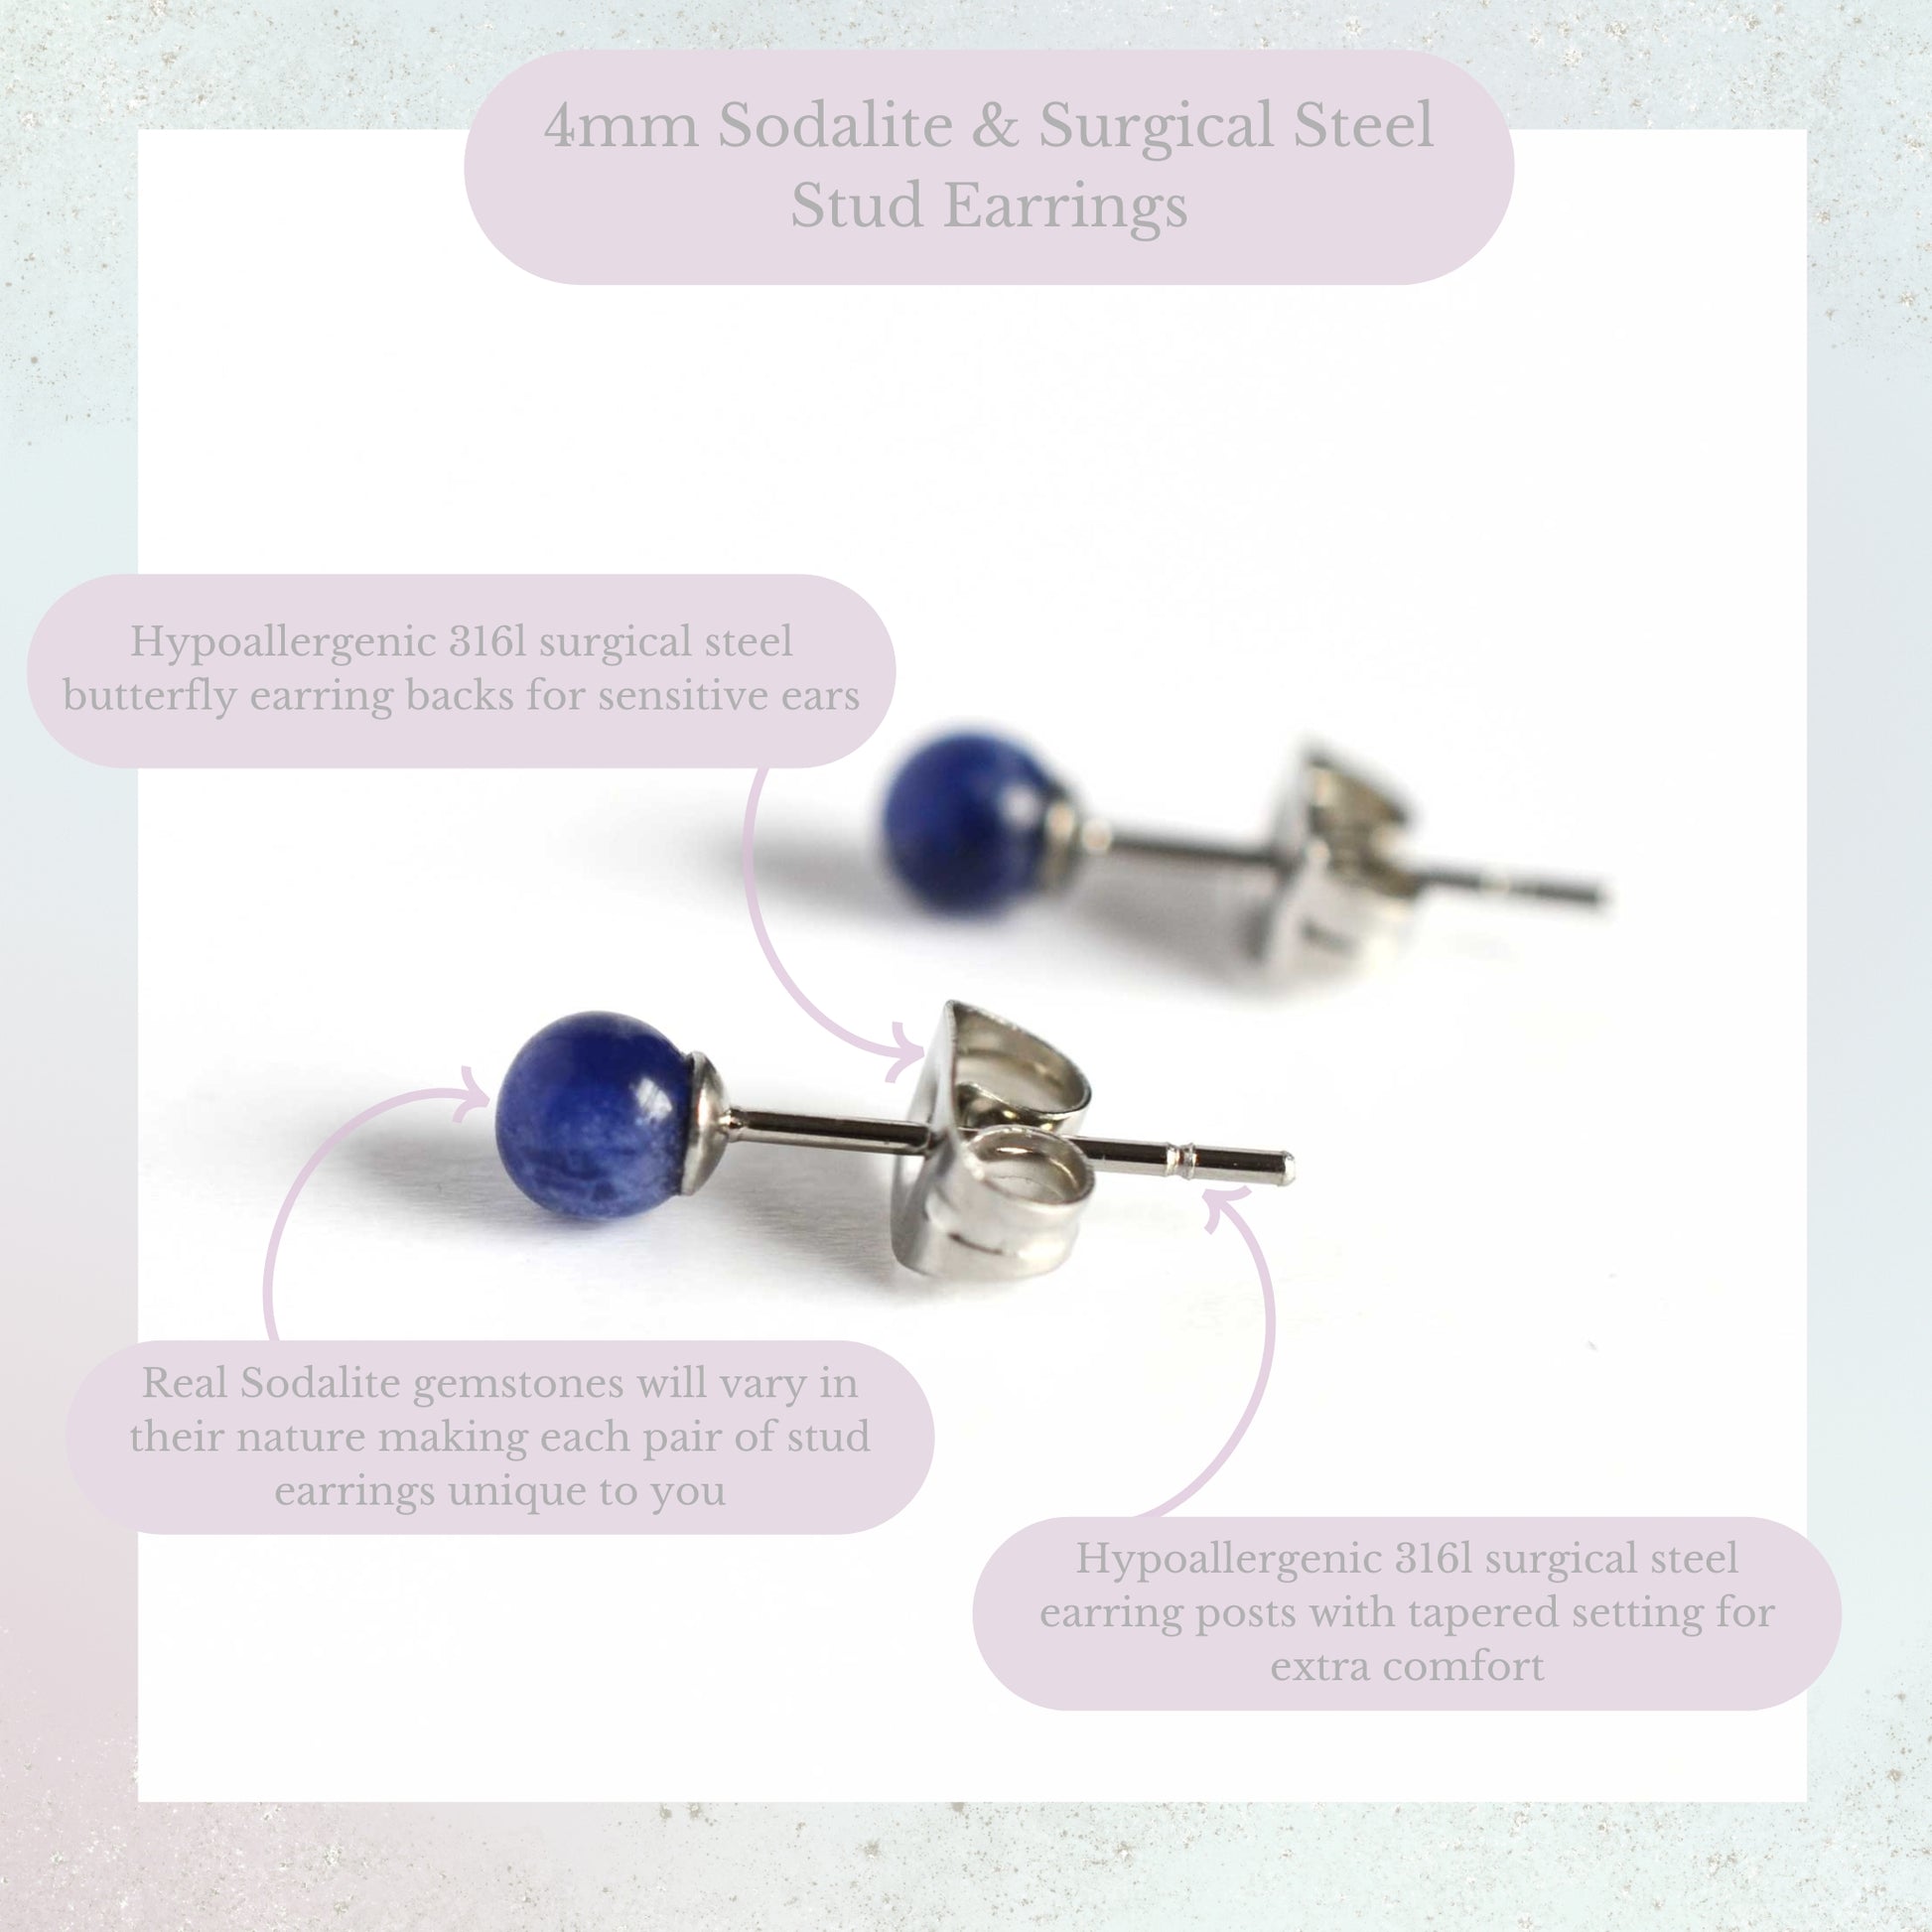 Product information graphic for 4mm Sodalite & surgical steel stud earrings